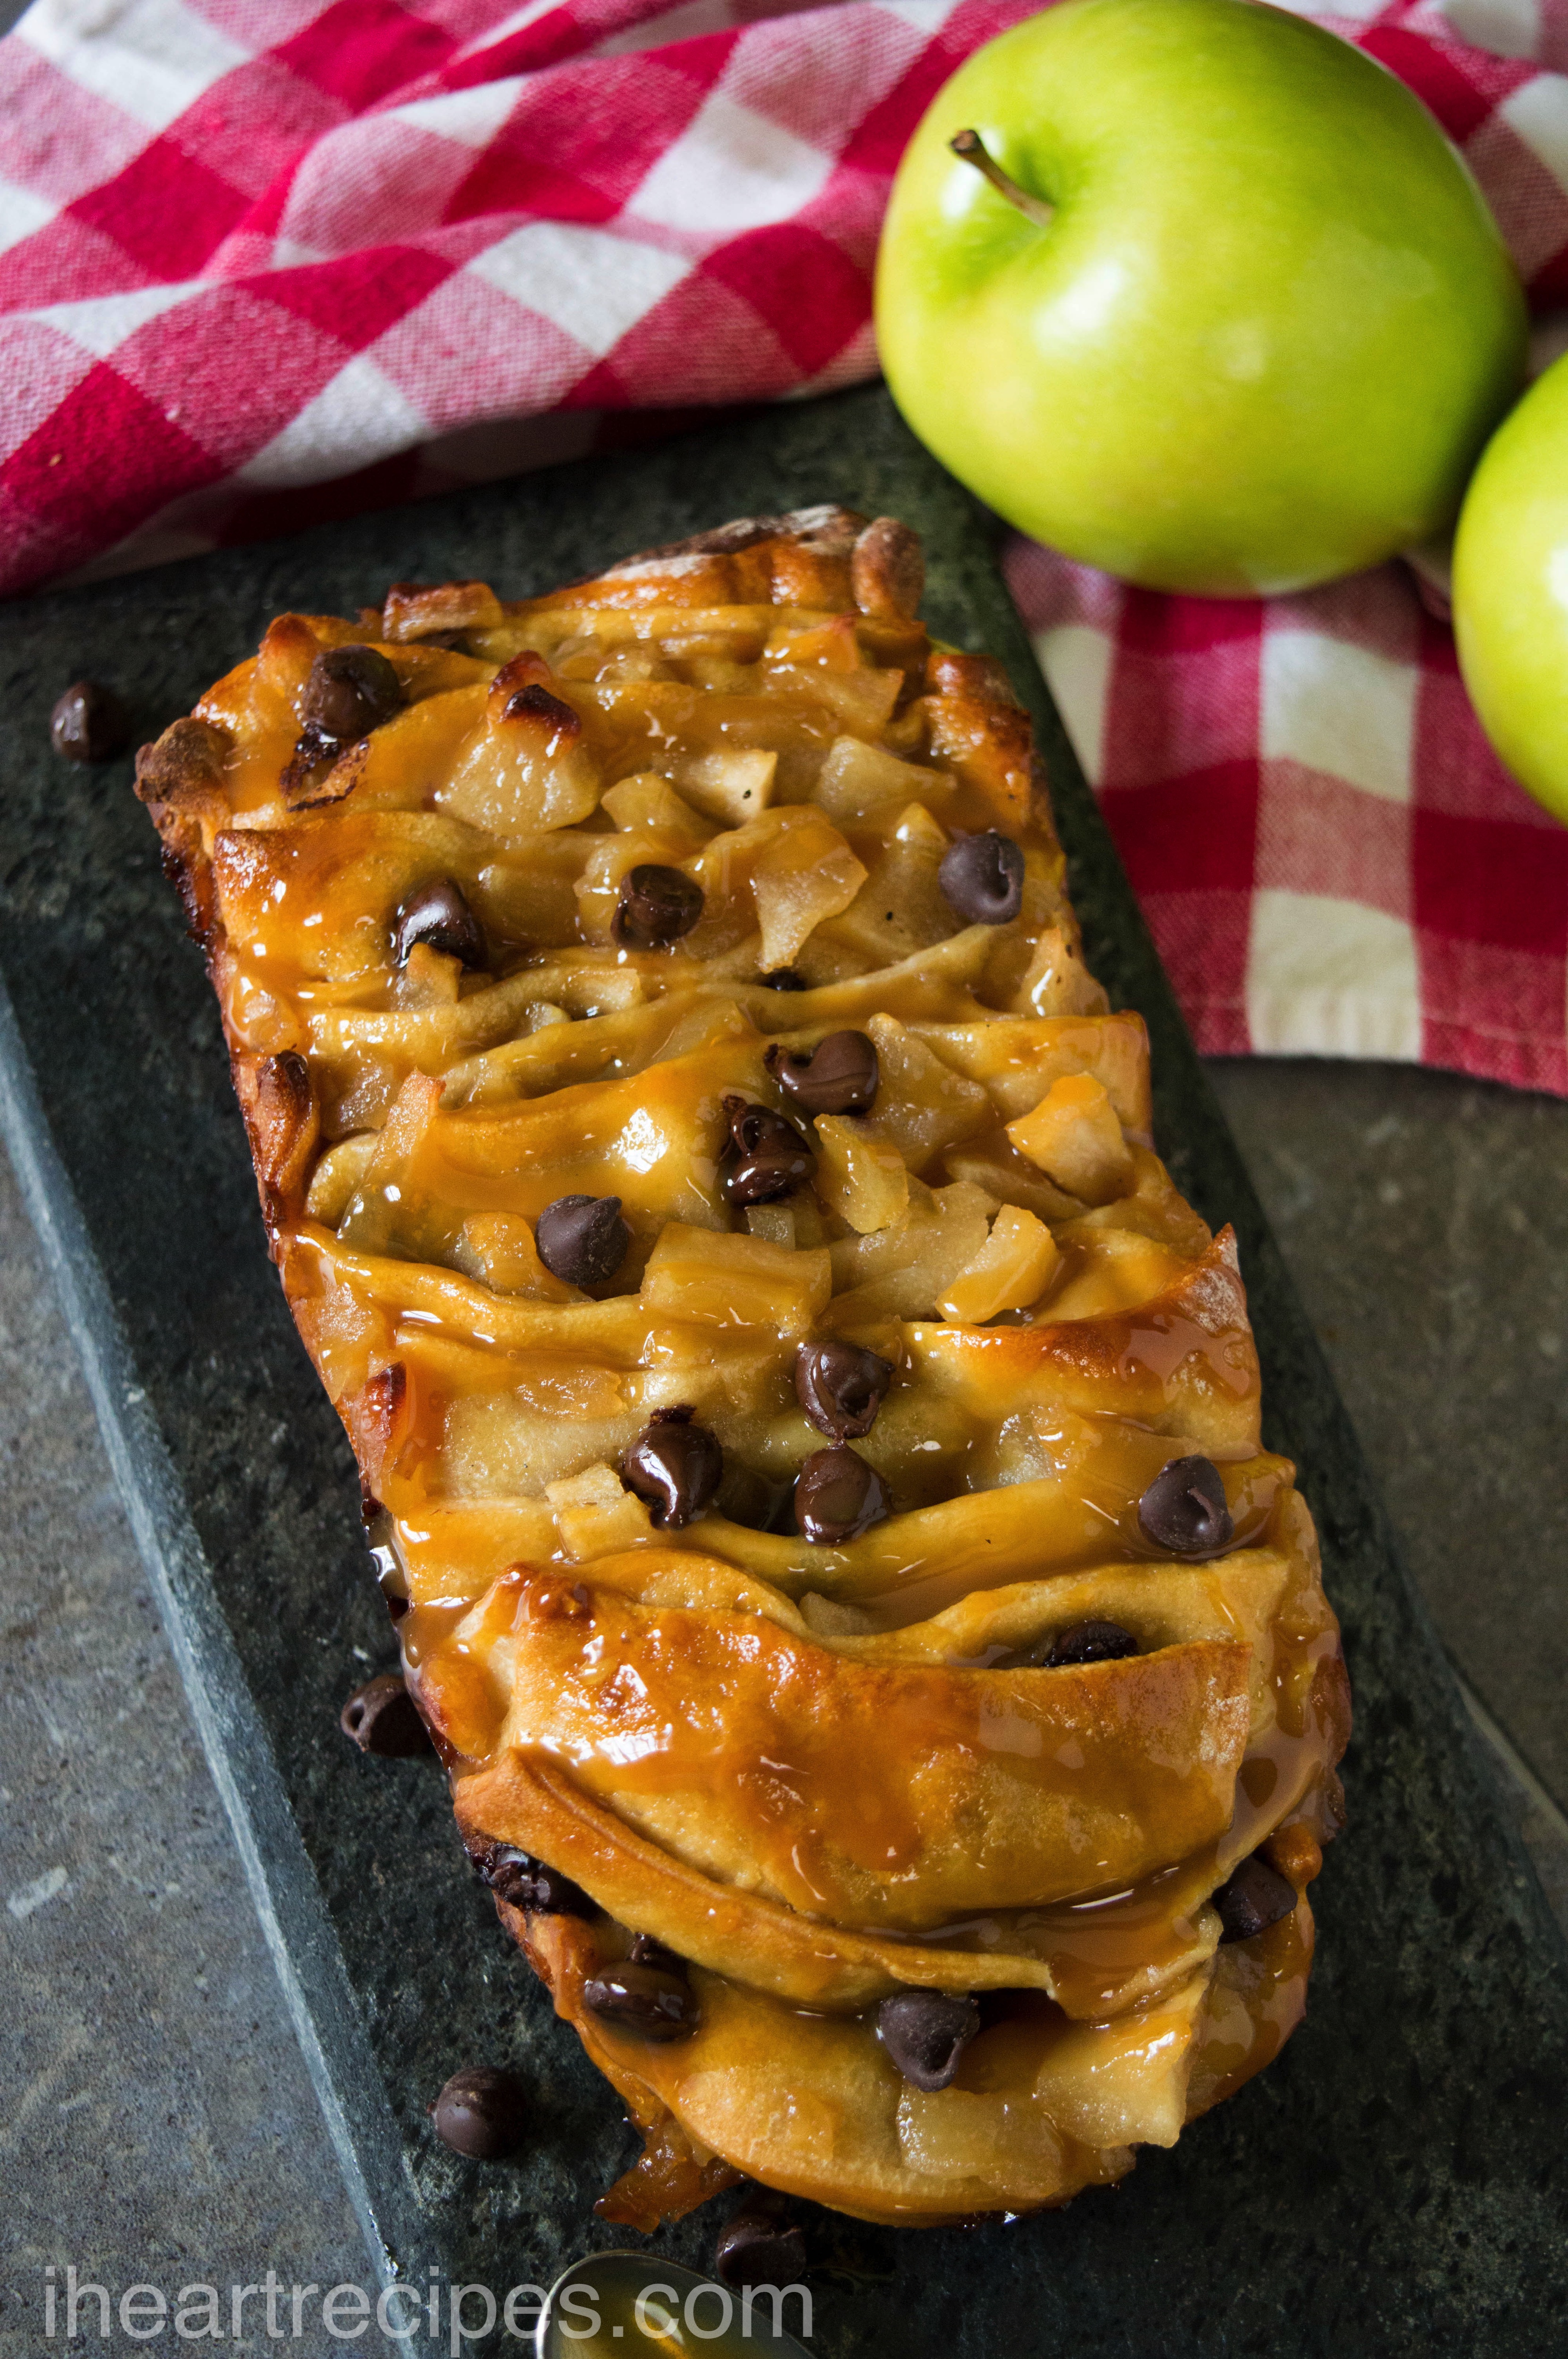 Sweet and tart Caramel Apple Pull Apart Bread sprinkled with chocolate chips and served on a marble platter. It's a crowd-pleasing treat!